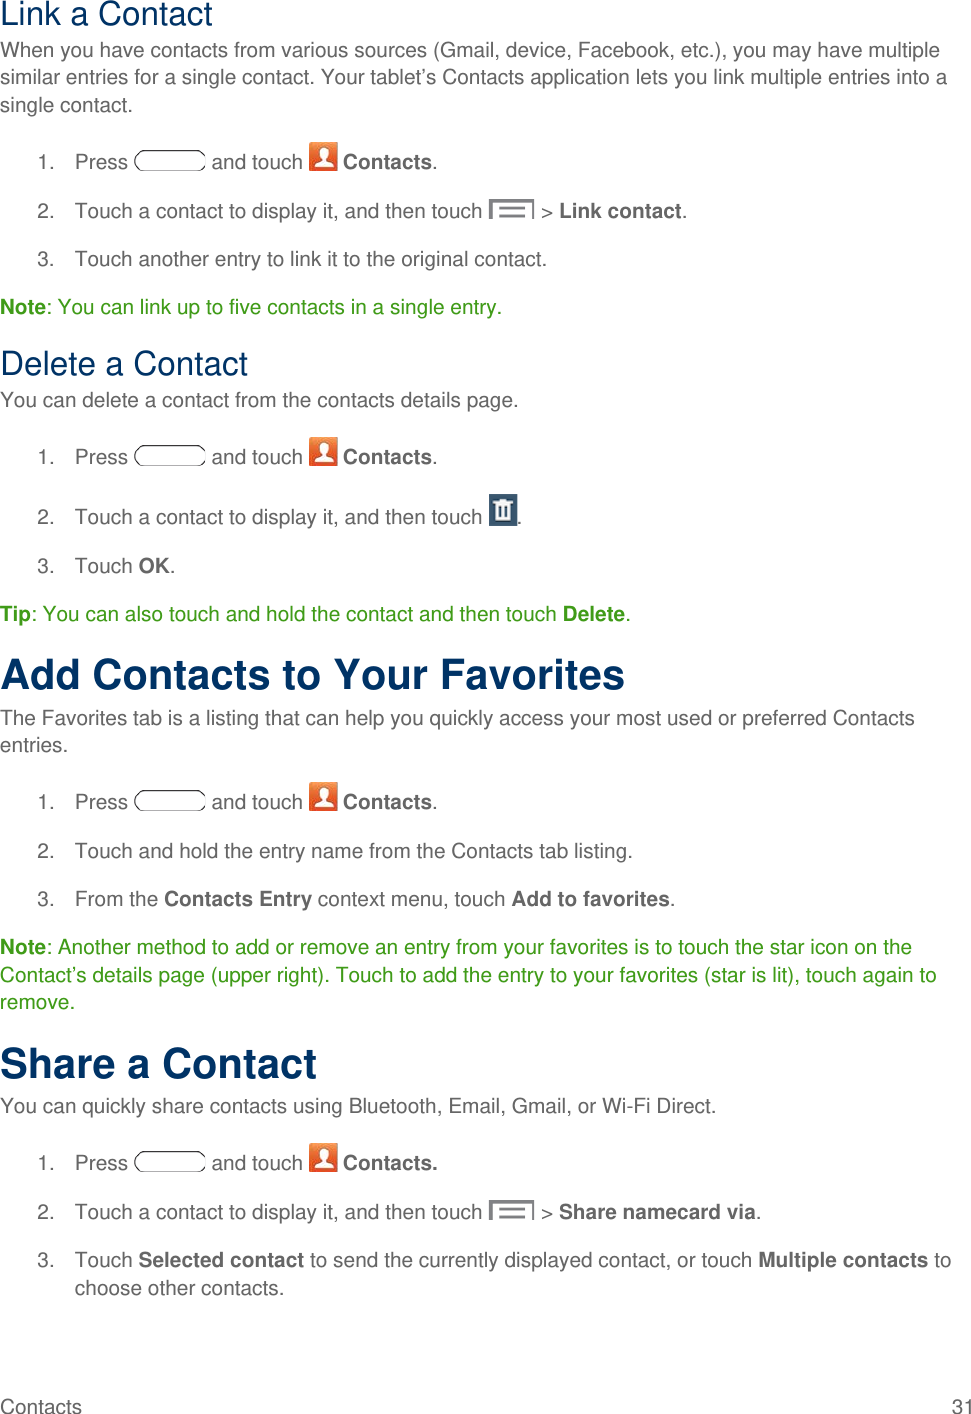 Link a Contact When you have contacts from various sources (Gmail, device, Facebook, etc.), you may have multiple similar entries for a single contact. Your tablet’s Contacts application lets you link multiple entries into a single contact. 1. Press   and touch   Contacts. 2. Touch a contact to display it, and then touch  &gt; Link contact. 3. Touch another entry to link it to the original contact. Note: You can link up to five contacts in a single entry. Delete a Contact You can delete a contact from the contacts details page. 1. Press   and touch   Contacts. 2. Touch a contact to display it, and then touch  . 3. Touch OK. Tip: You can also touch and hold the contact and then touch Delete. Add Contacts to Your Favorites The Favorites tab is a listing that can help you quickly access your most used or preferred Contacts entries. 1. Press   and touch   Contacts. 2. Touch and hold the entry name from the Contacts tab listing. 3. From the Contacts Entry context menu, touch Add to favorites.  Note: Another method to add or remove an entry from your favorites is to touch the star icon on the Contact’s details page (upper right). Touch to add the entry to your favorites (star is lit), touch again to remove. Share a Contact You can quickly share contacts using Bluetooth, Email, Gmail, or Wi-Fi Direct. 1. Press   and touch   Contacts. 2. Touch a contact to display it, and then touch  &gt; Share namecard via. 3. Touch Selected contact to send the currently displayed contact, or touch Multiple contacts to choose other contacts. Contacts 31   